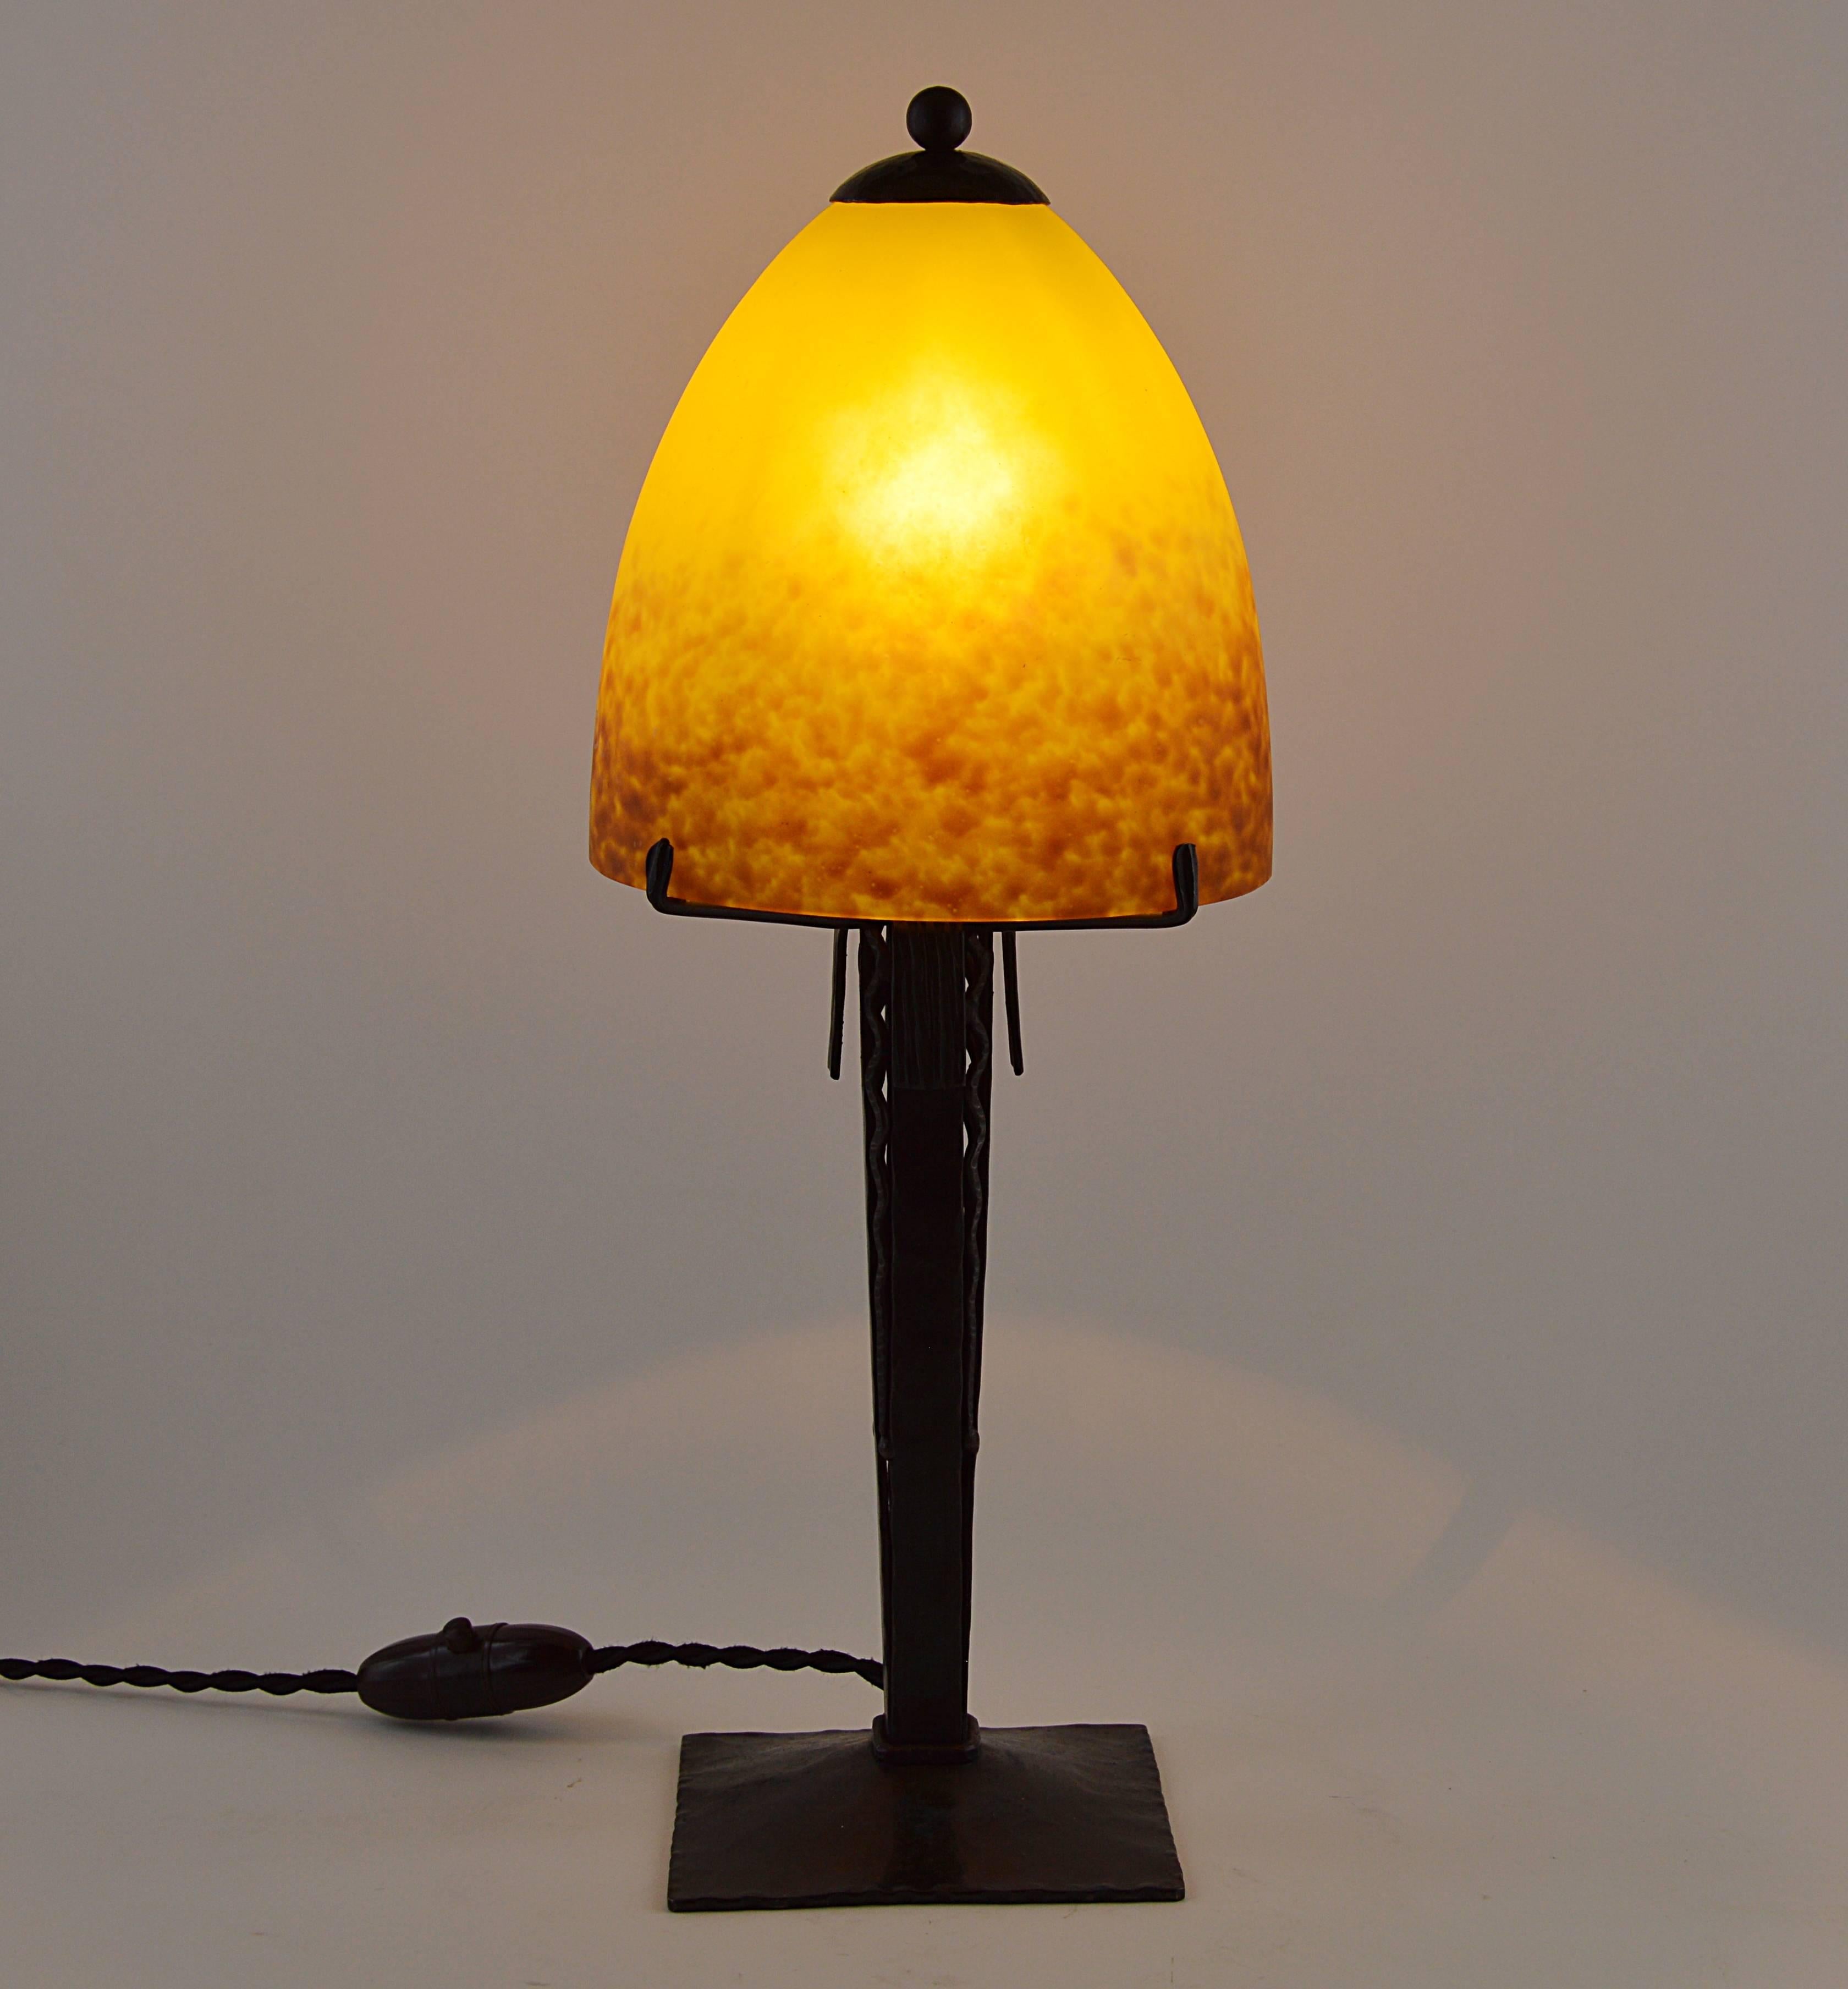 Take advantage of our nice summer prices. French Art Deco desk-table lamp by Andre Delatte, Jarville (Nancy), late 1920s.The shade is made of blown double glass with powder application between both layers. Colors are yellow and brown. The shade